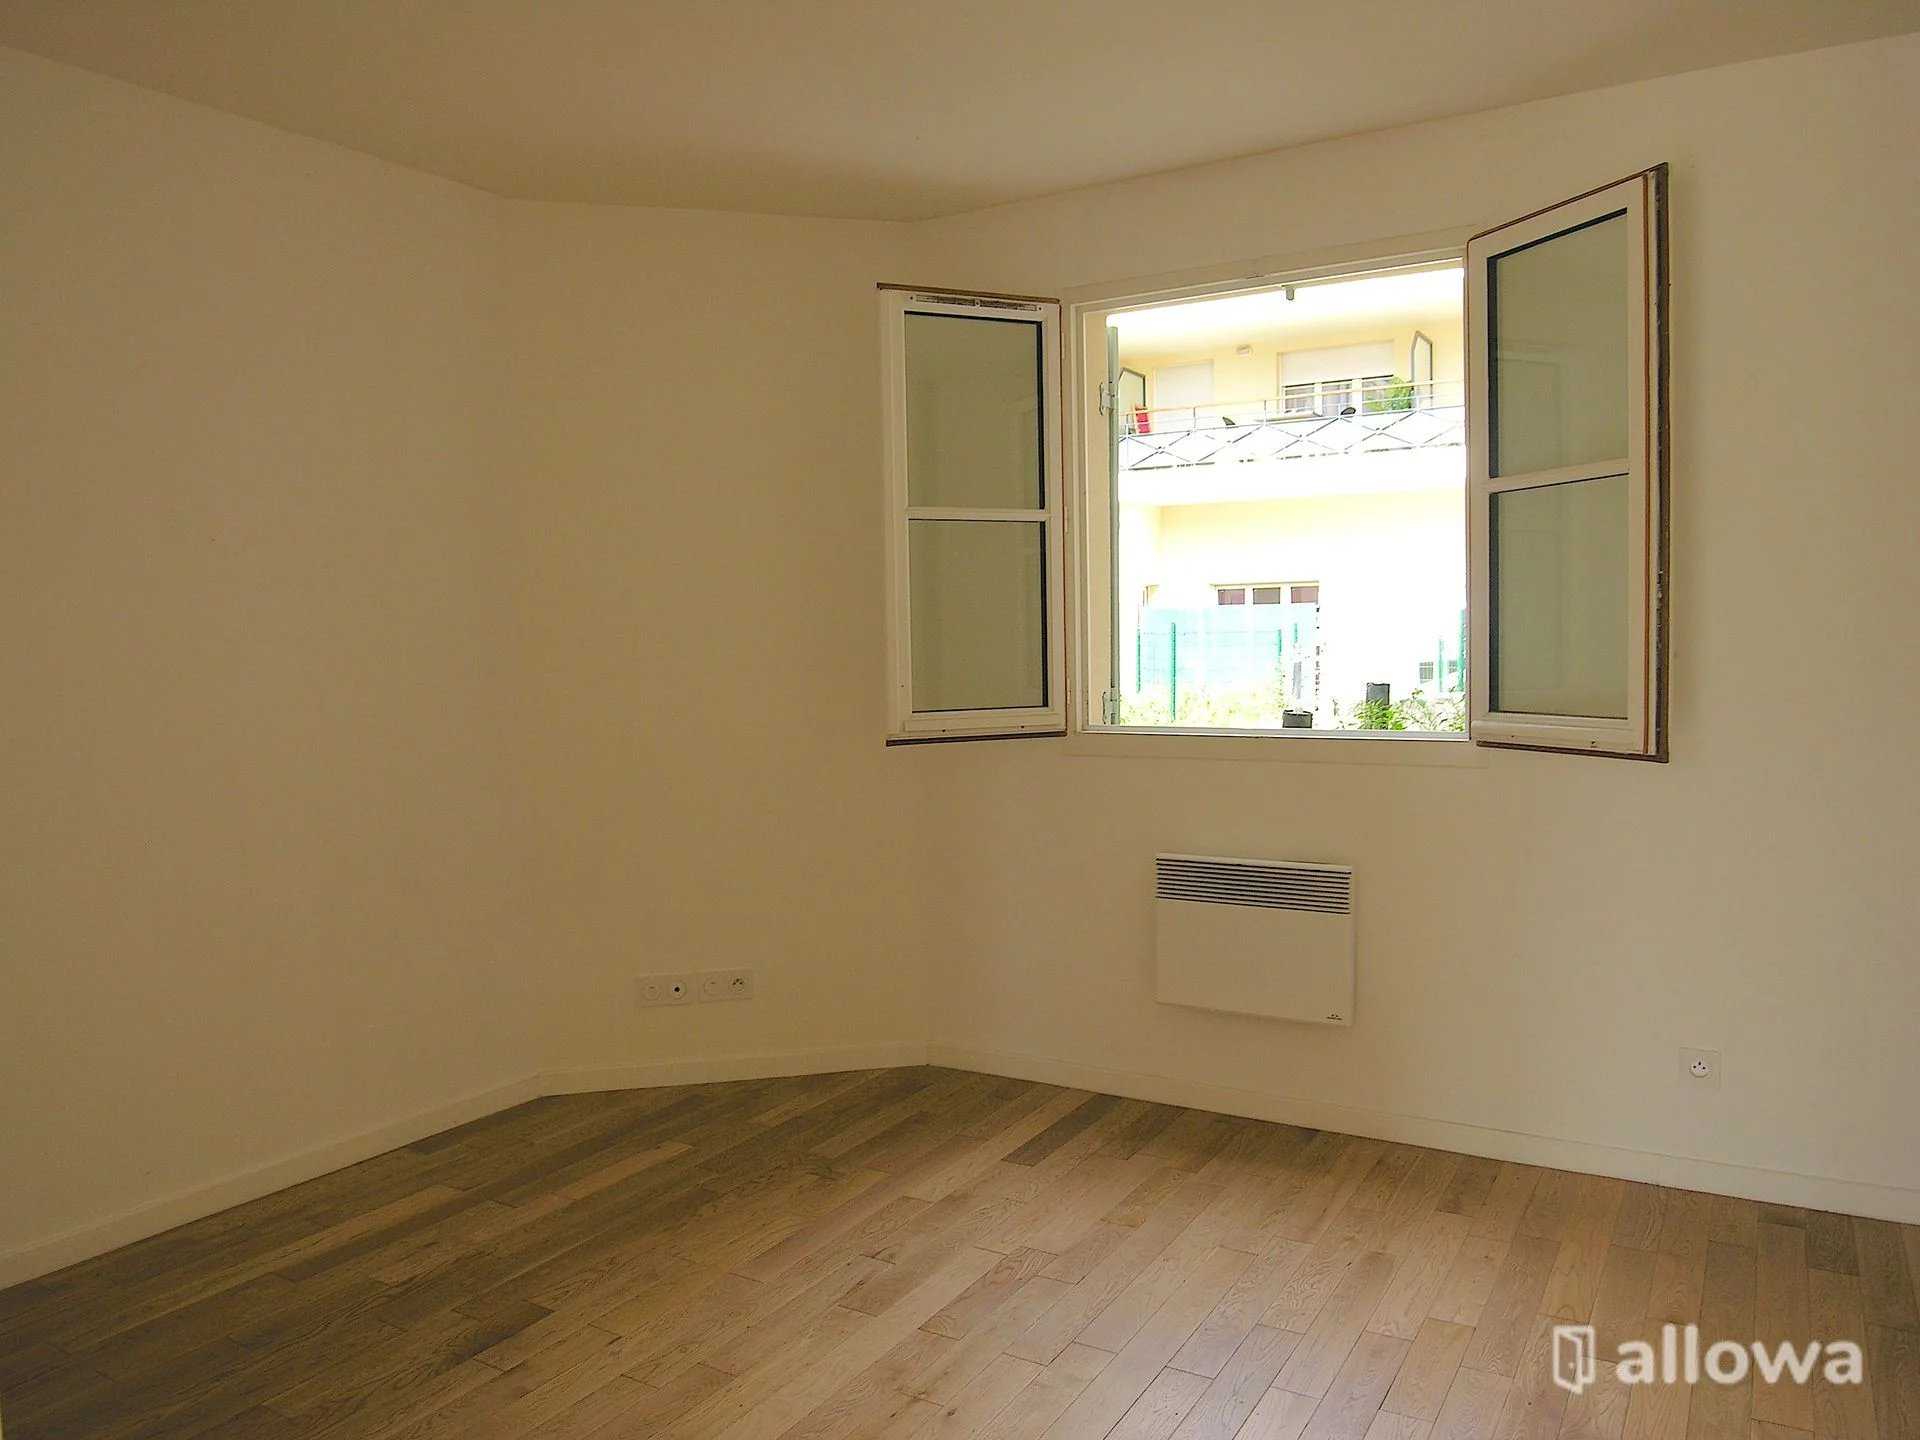 Residential in Maisons-Laffitte, Yvelines 12541293